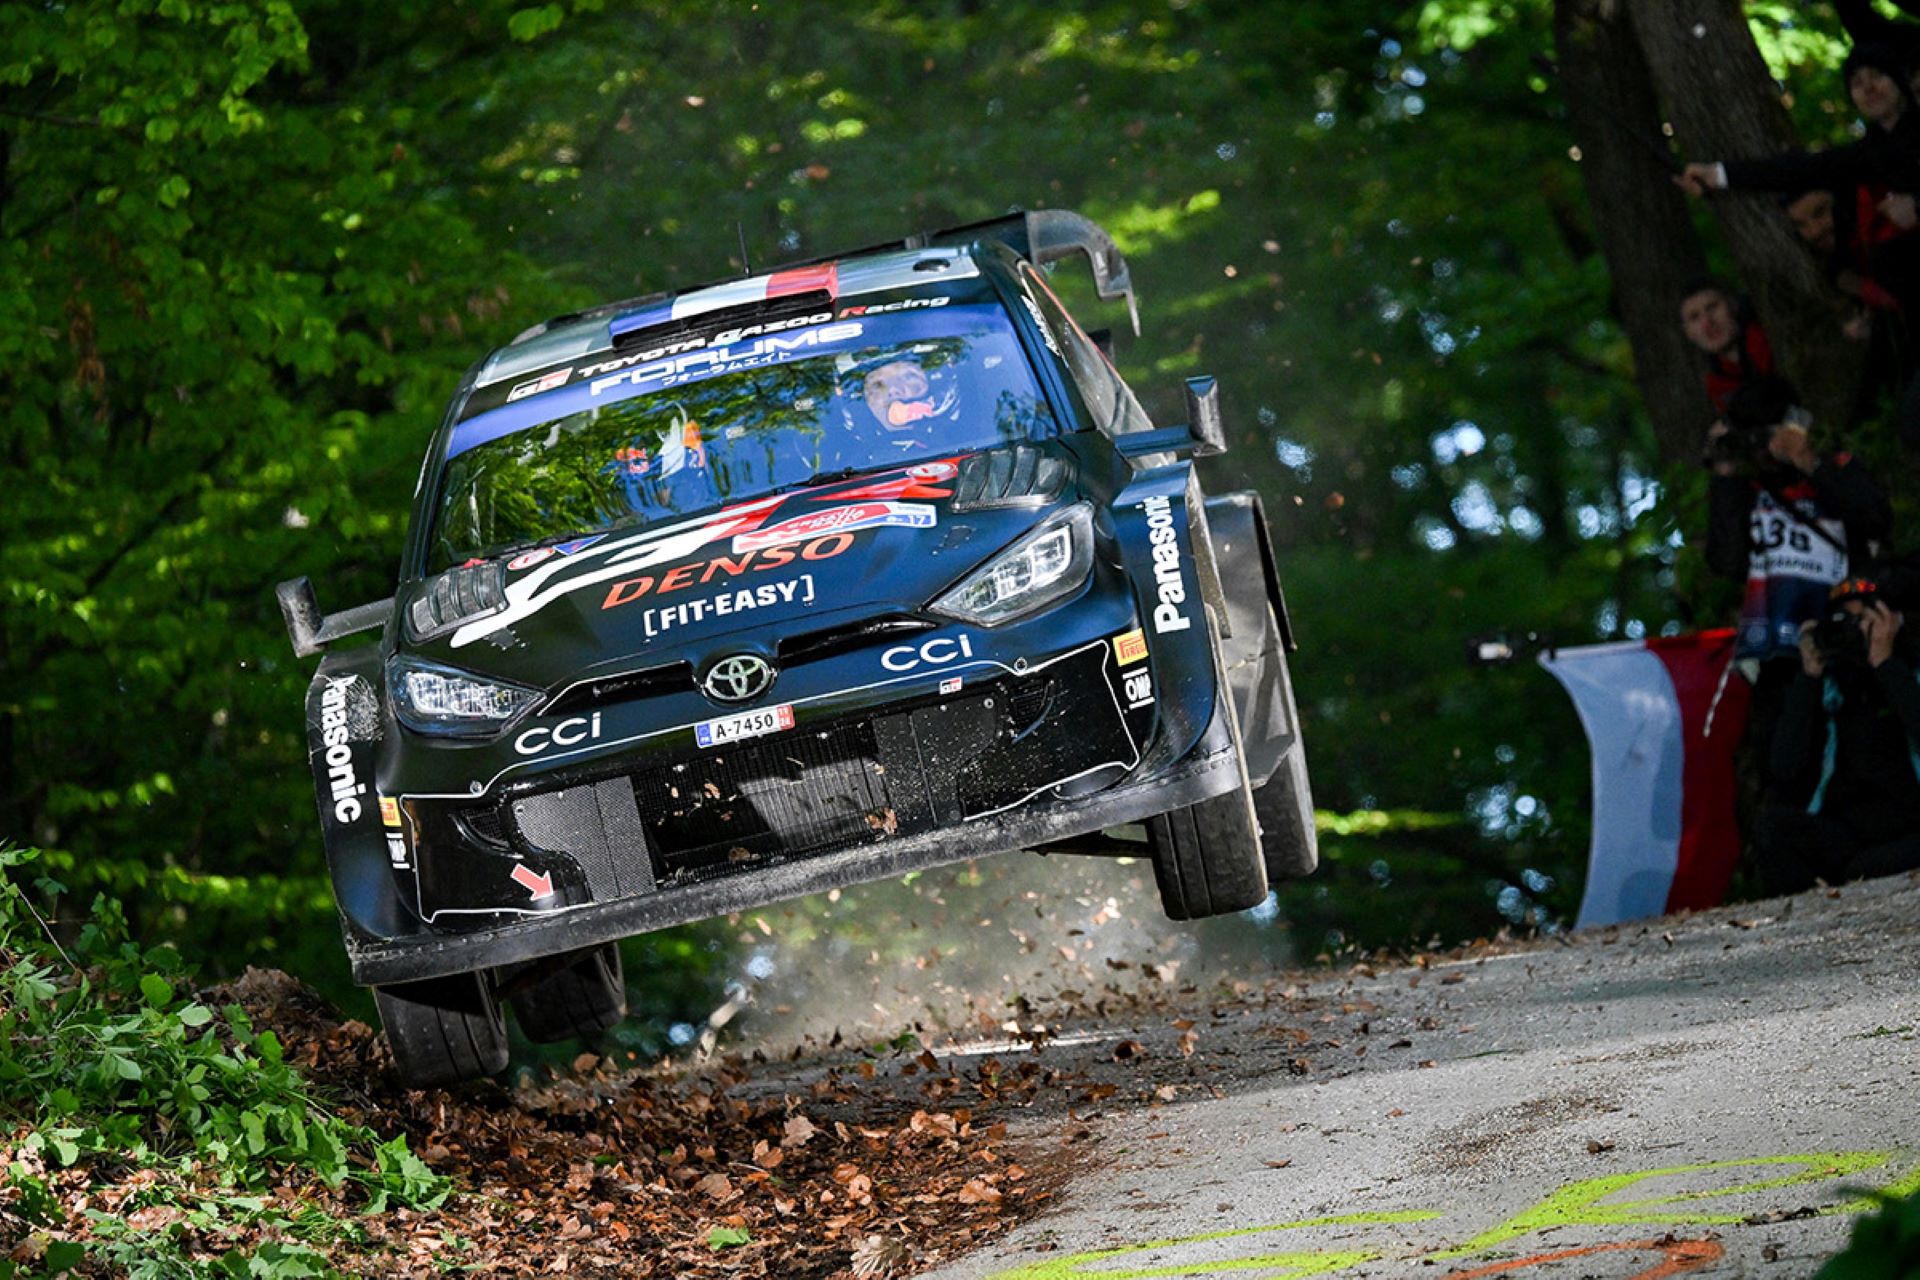 Toyota Gazoo Racing Clinches Top Two Spots in Thrilling Croatia Rally Finish